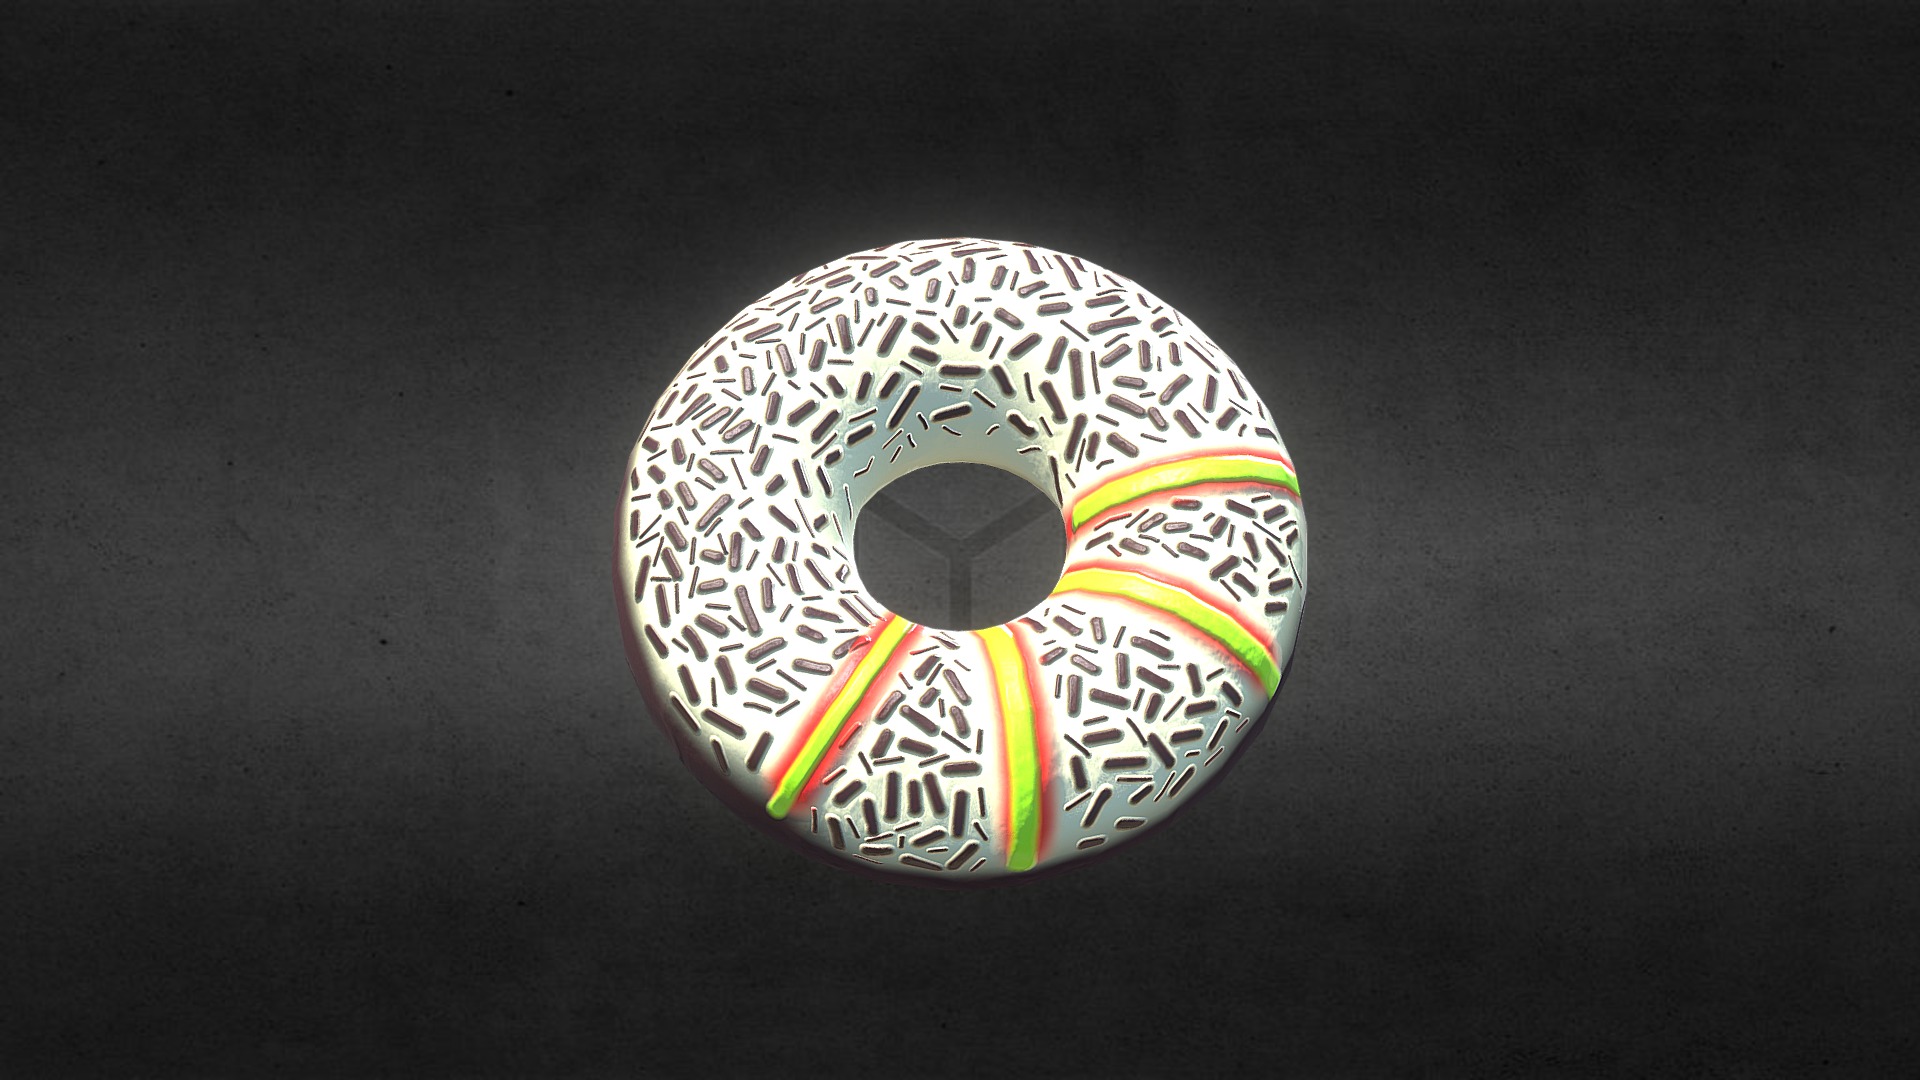 3D model Donuts 05 - This is a 3D model of the Donuts 05. The 3D model is about a circular object with a design on it.